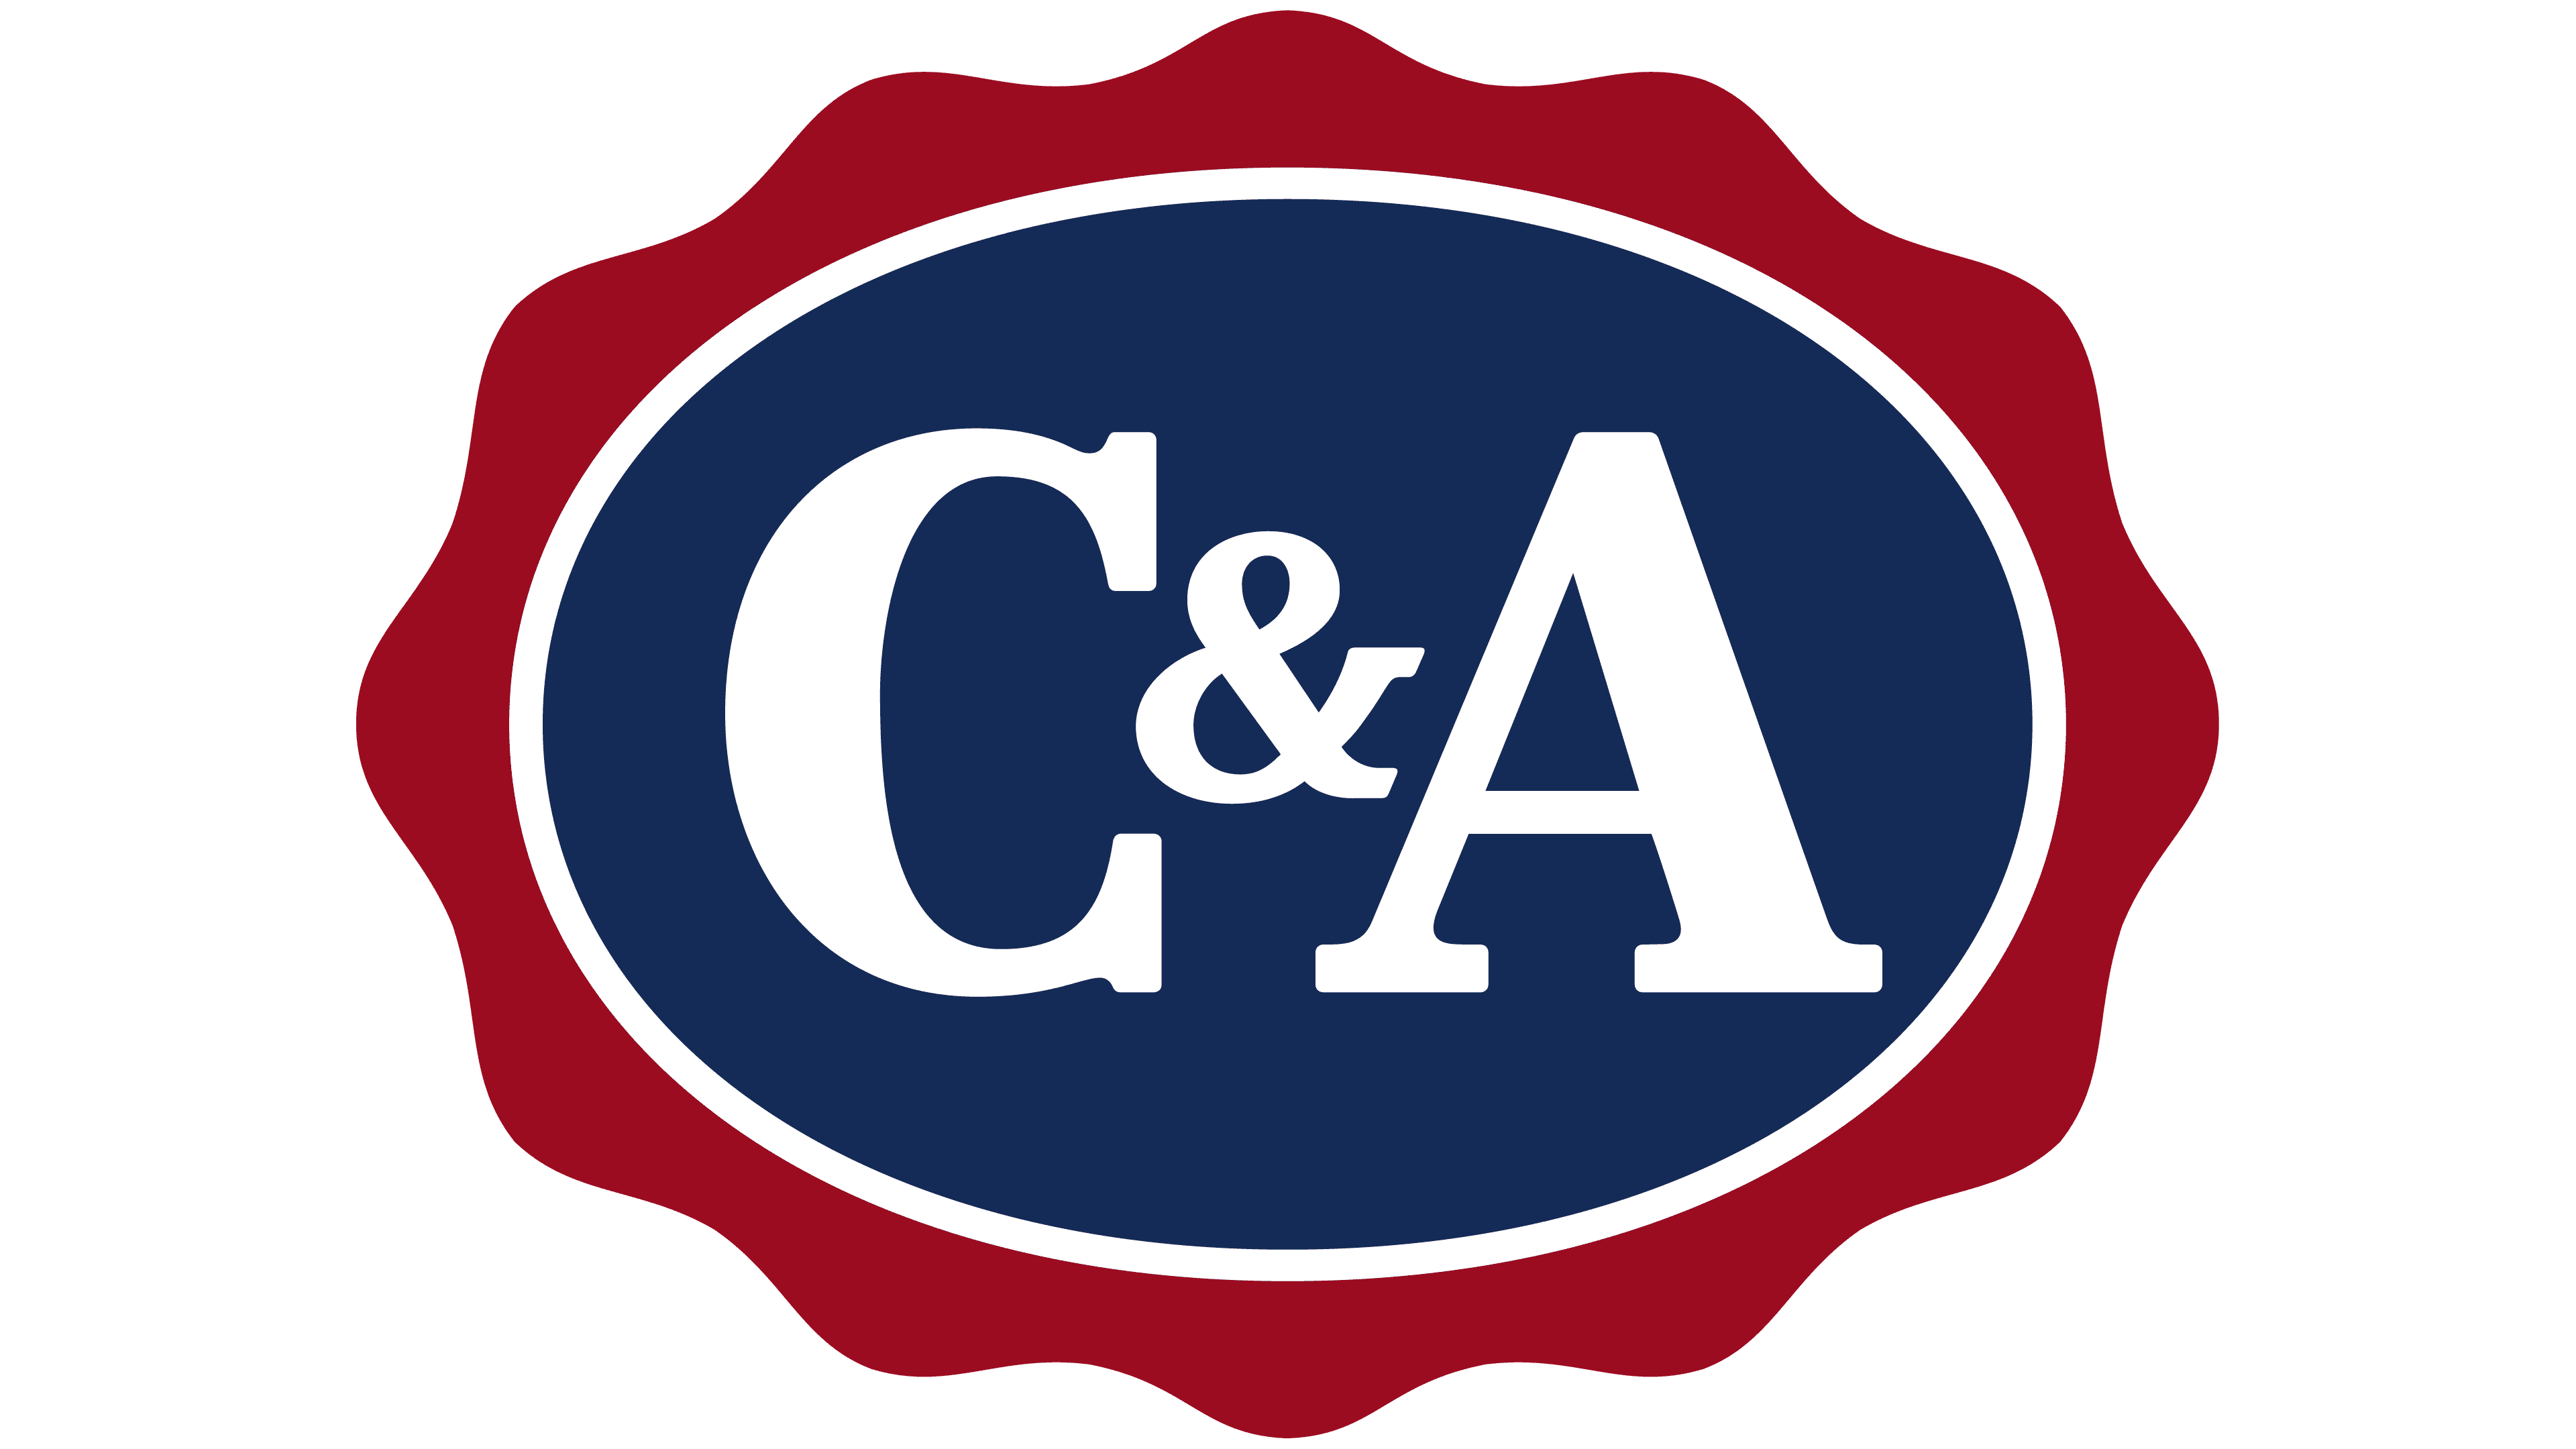 C&A Logo and symbol, meaning, history, PNG, brand